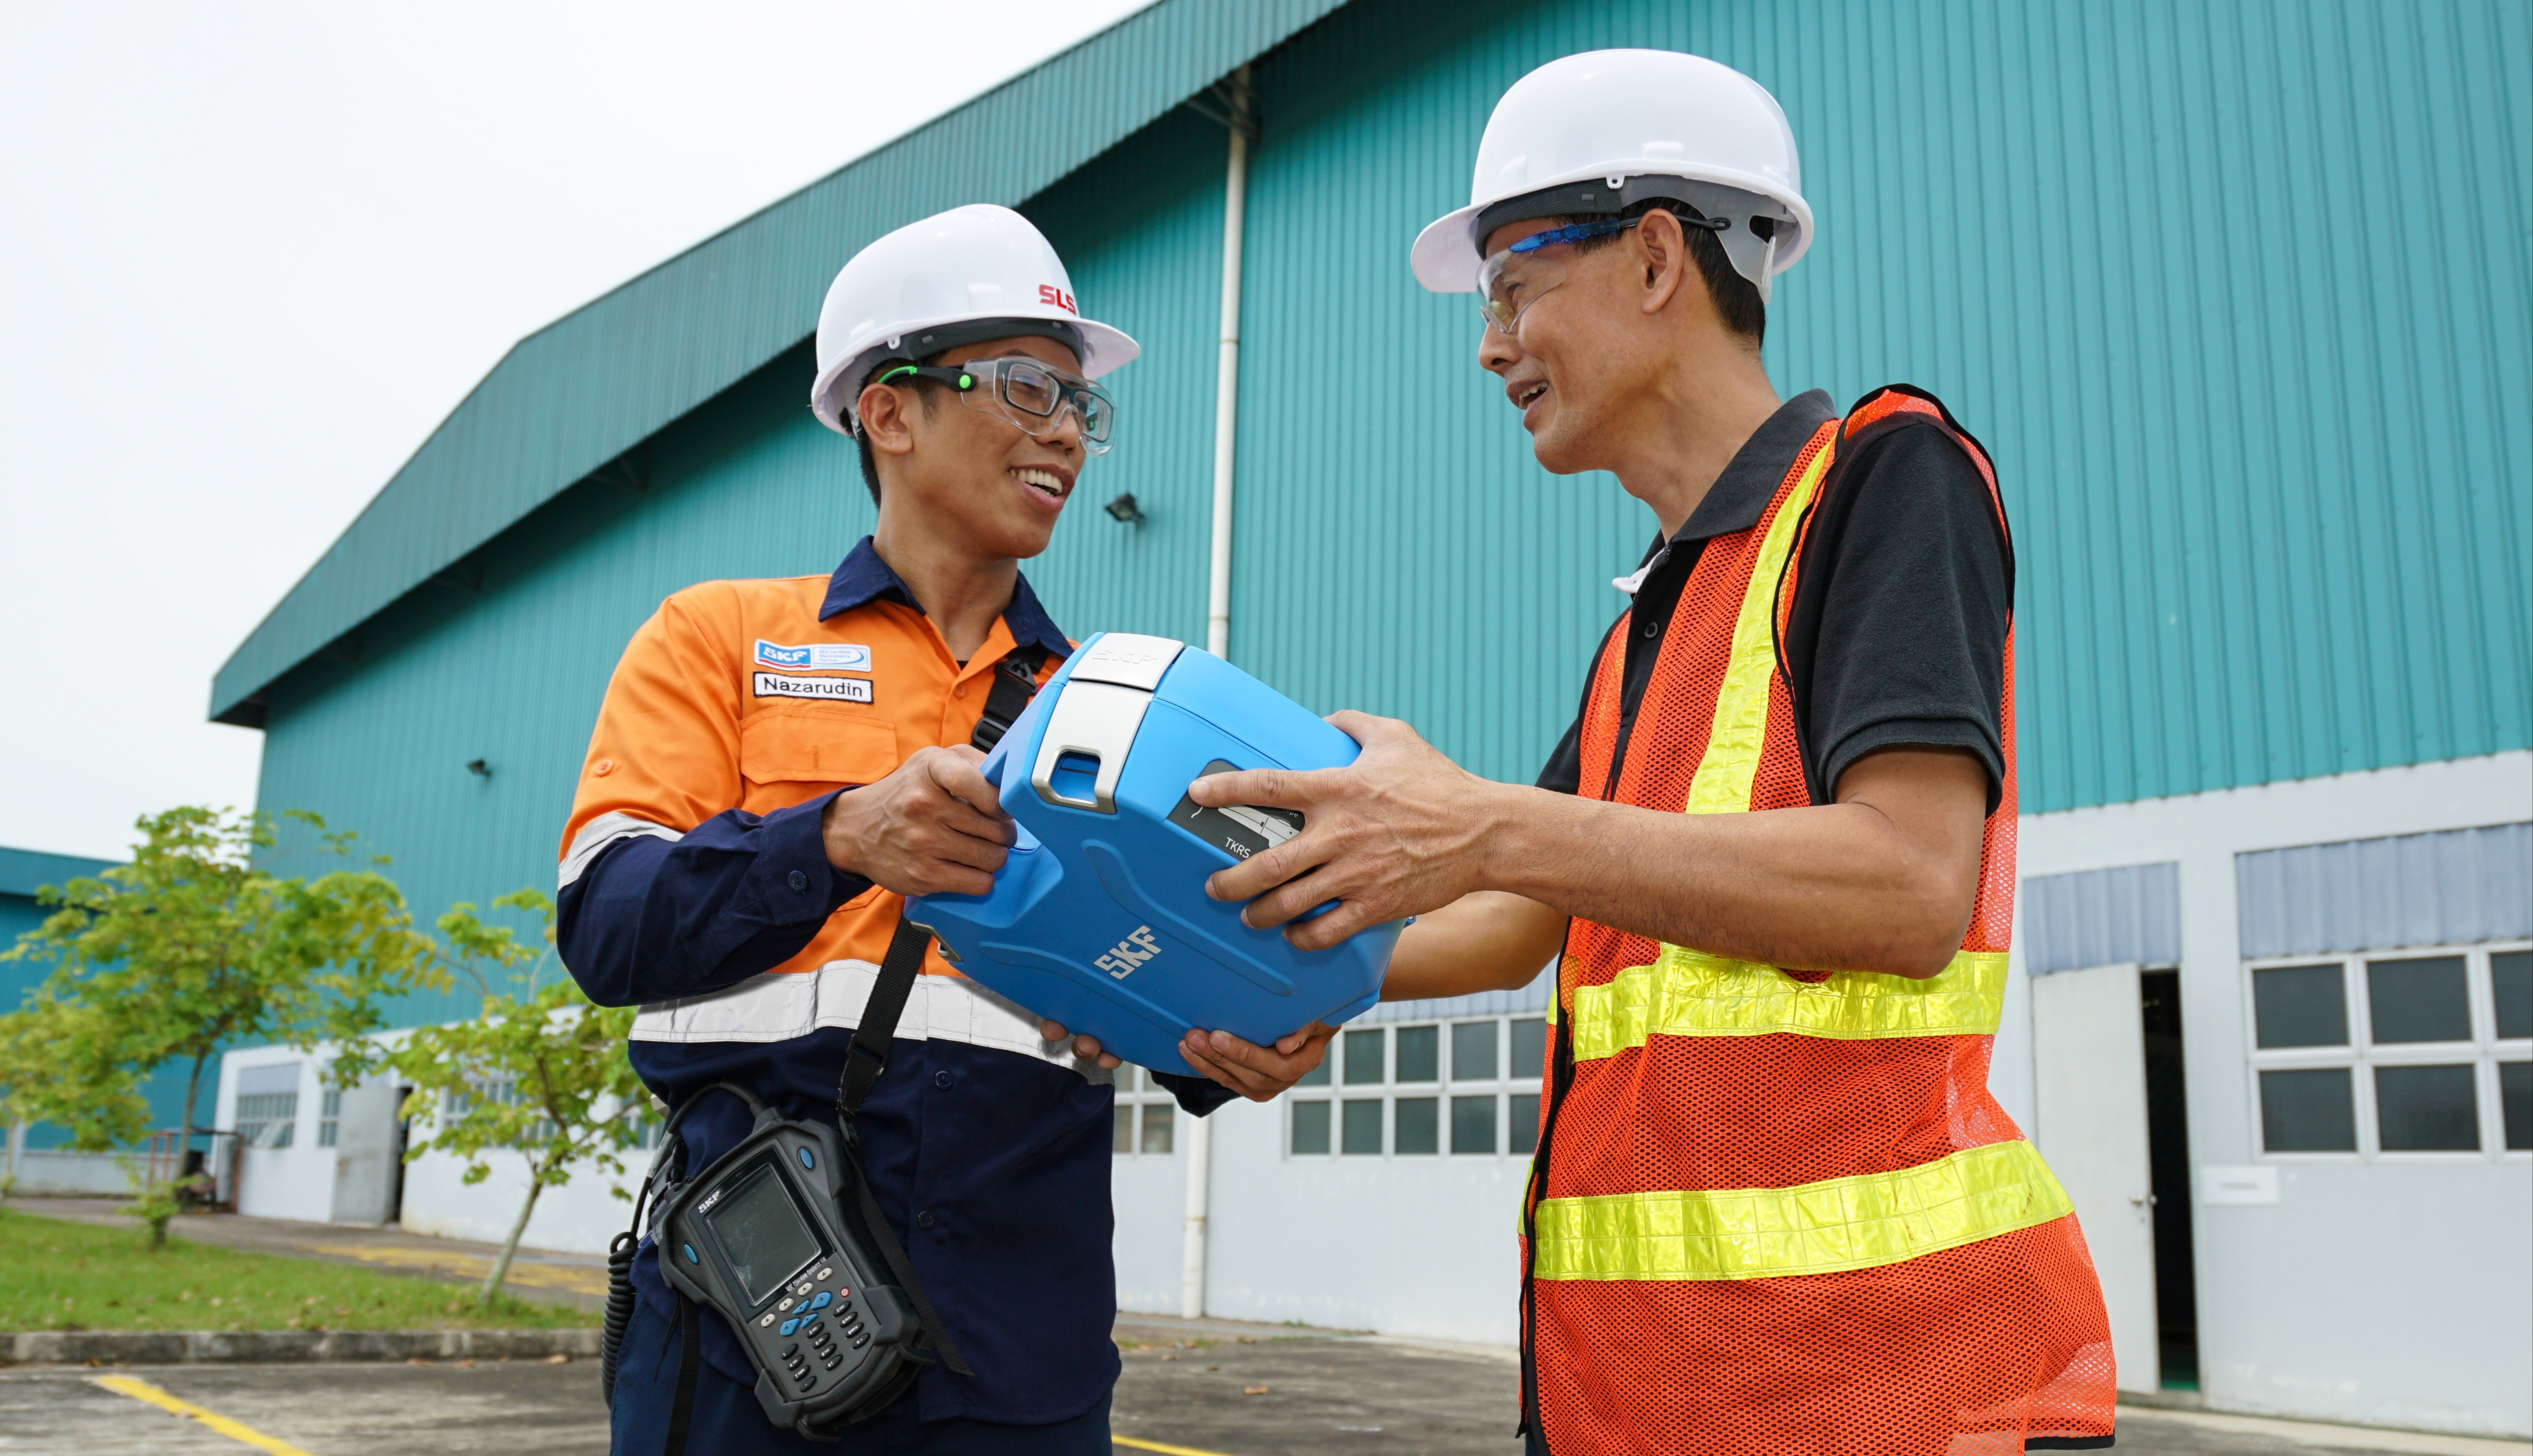 Image shows and SLS engineer and a customer holding an SKF MaPro toolkit